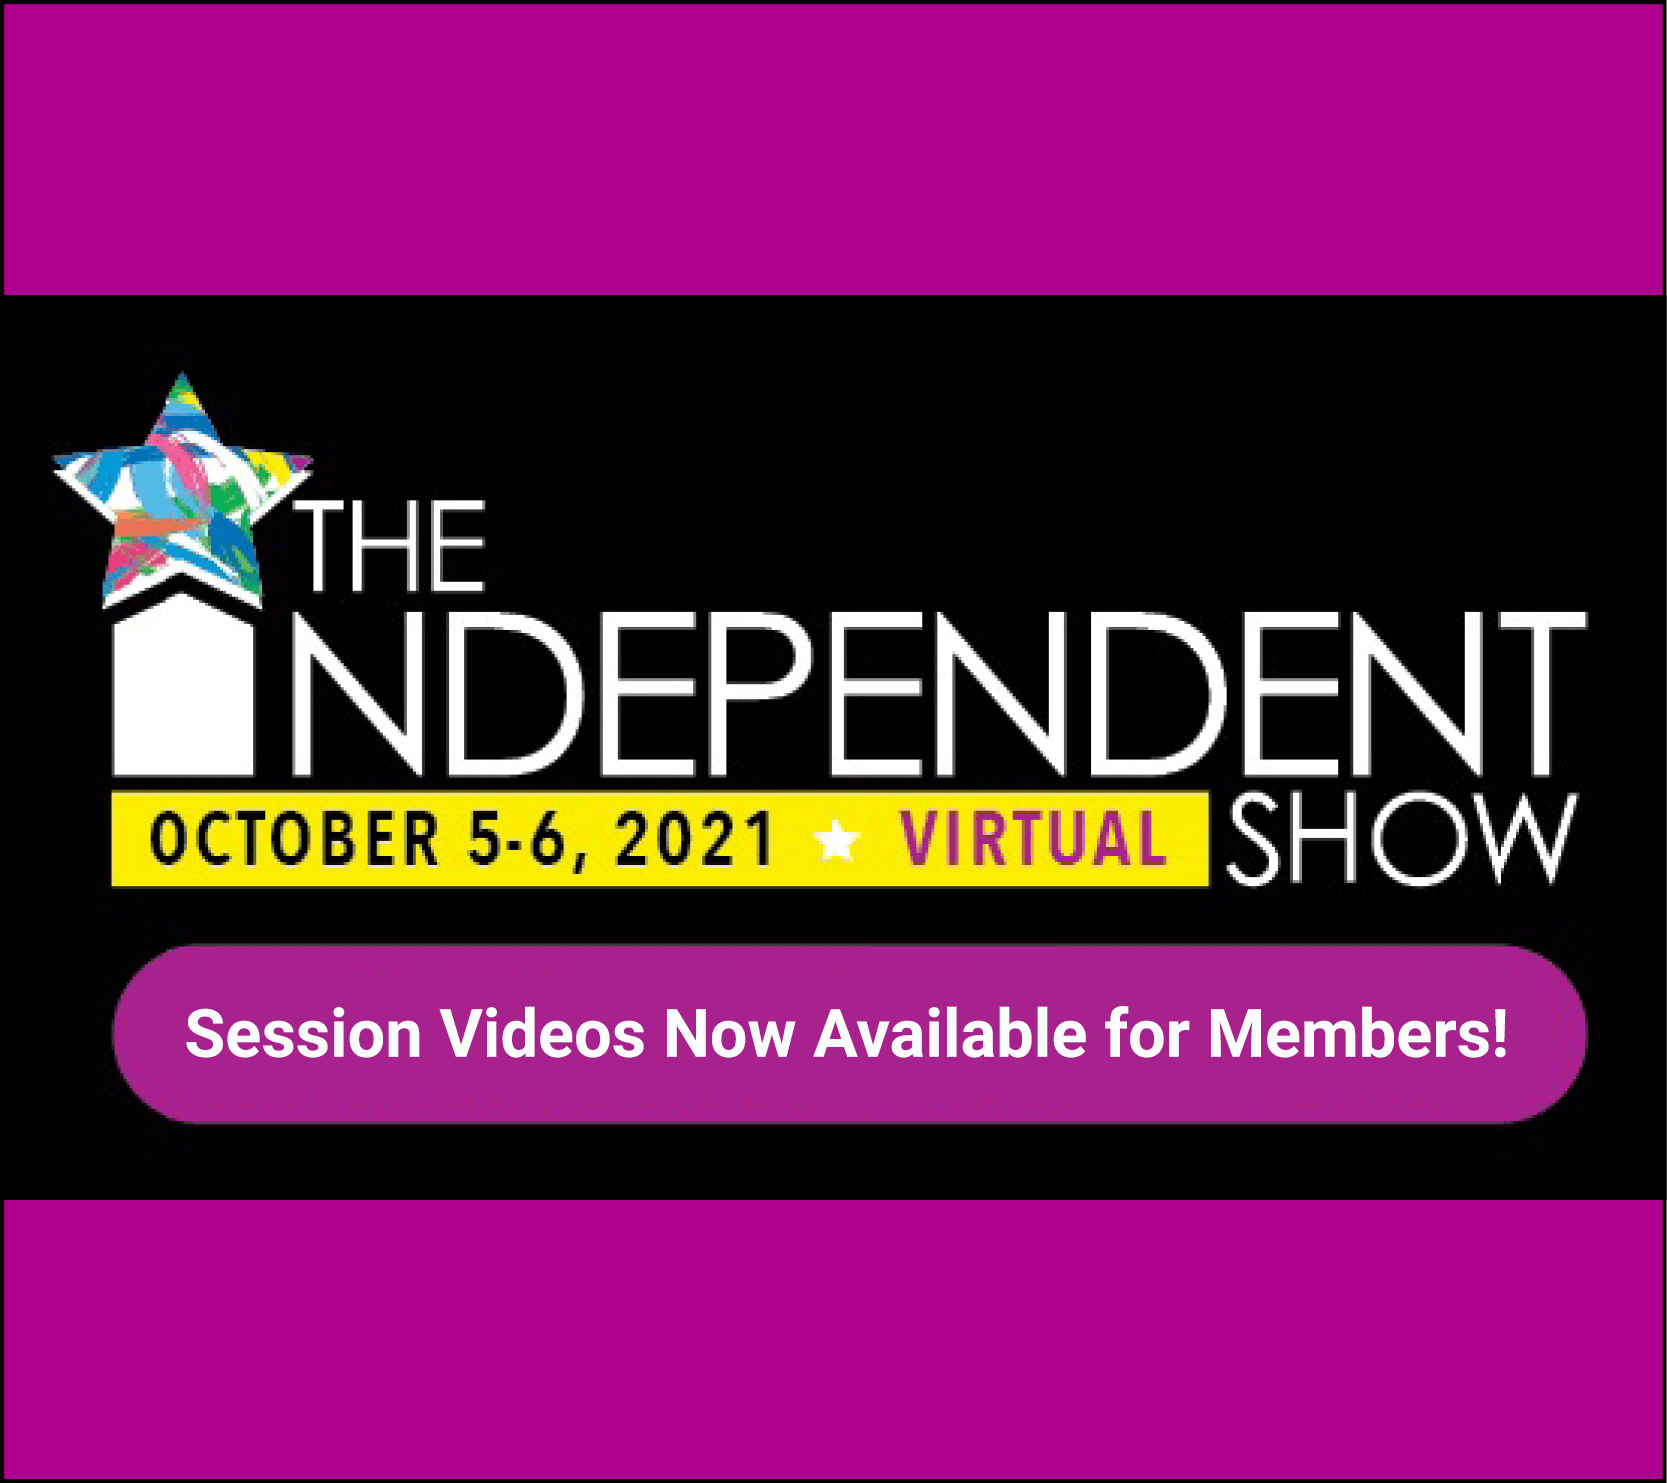 The Independent Show 2021 logo